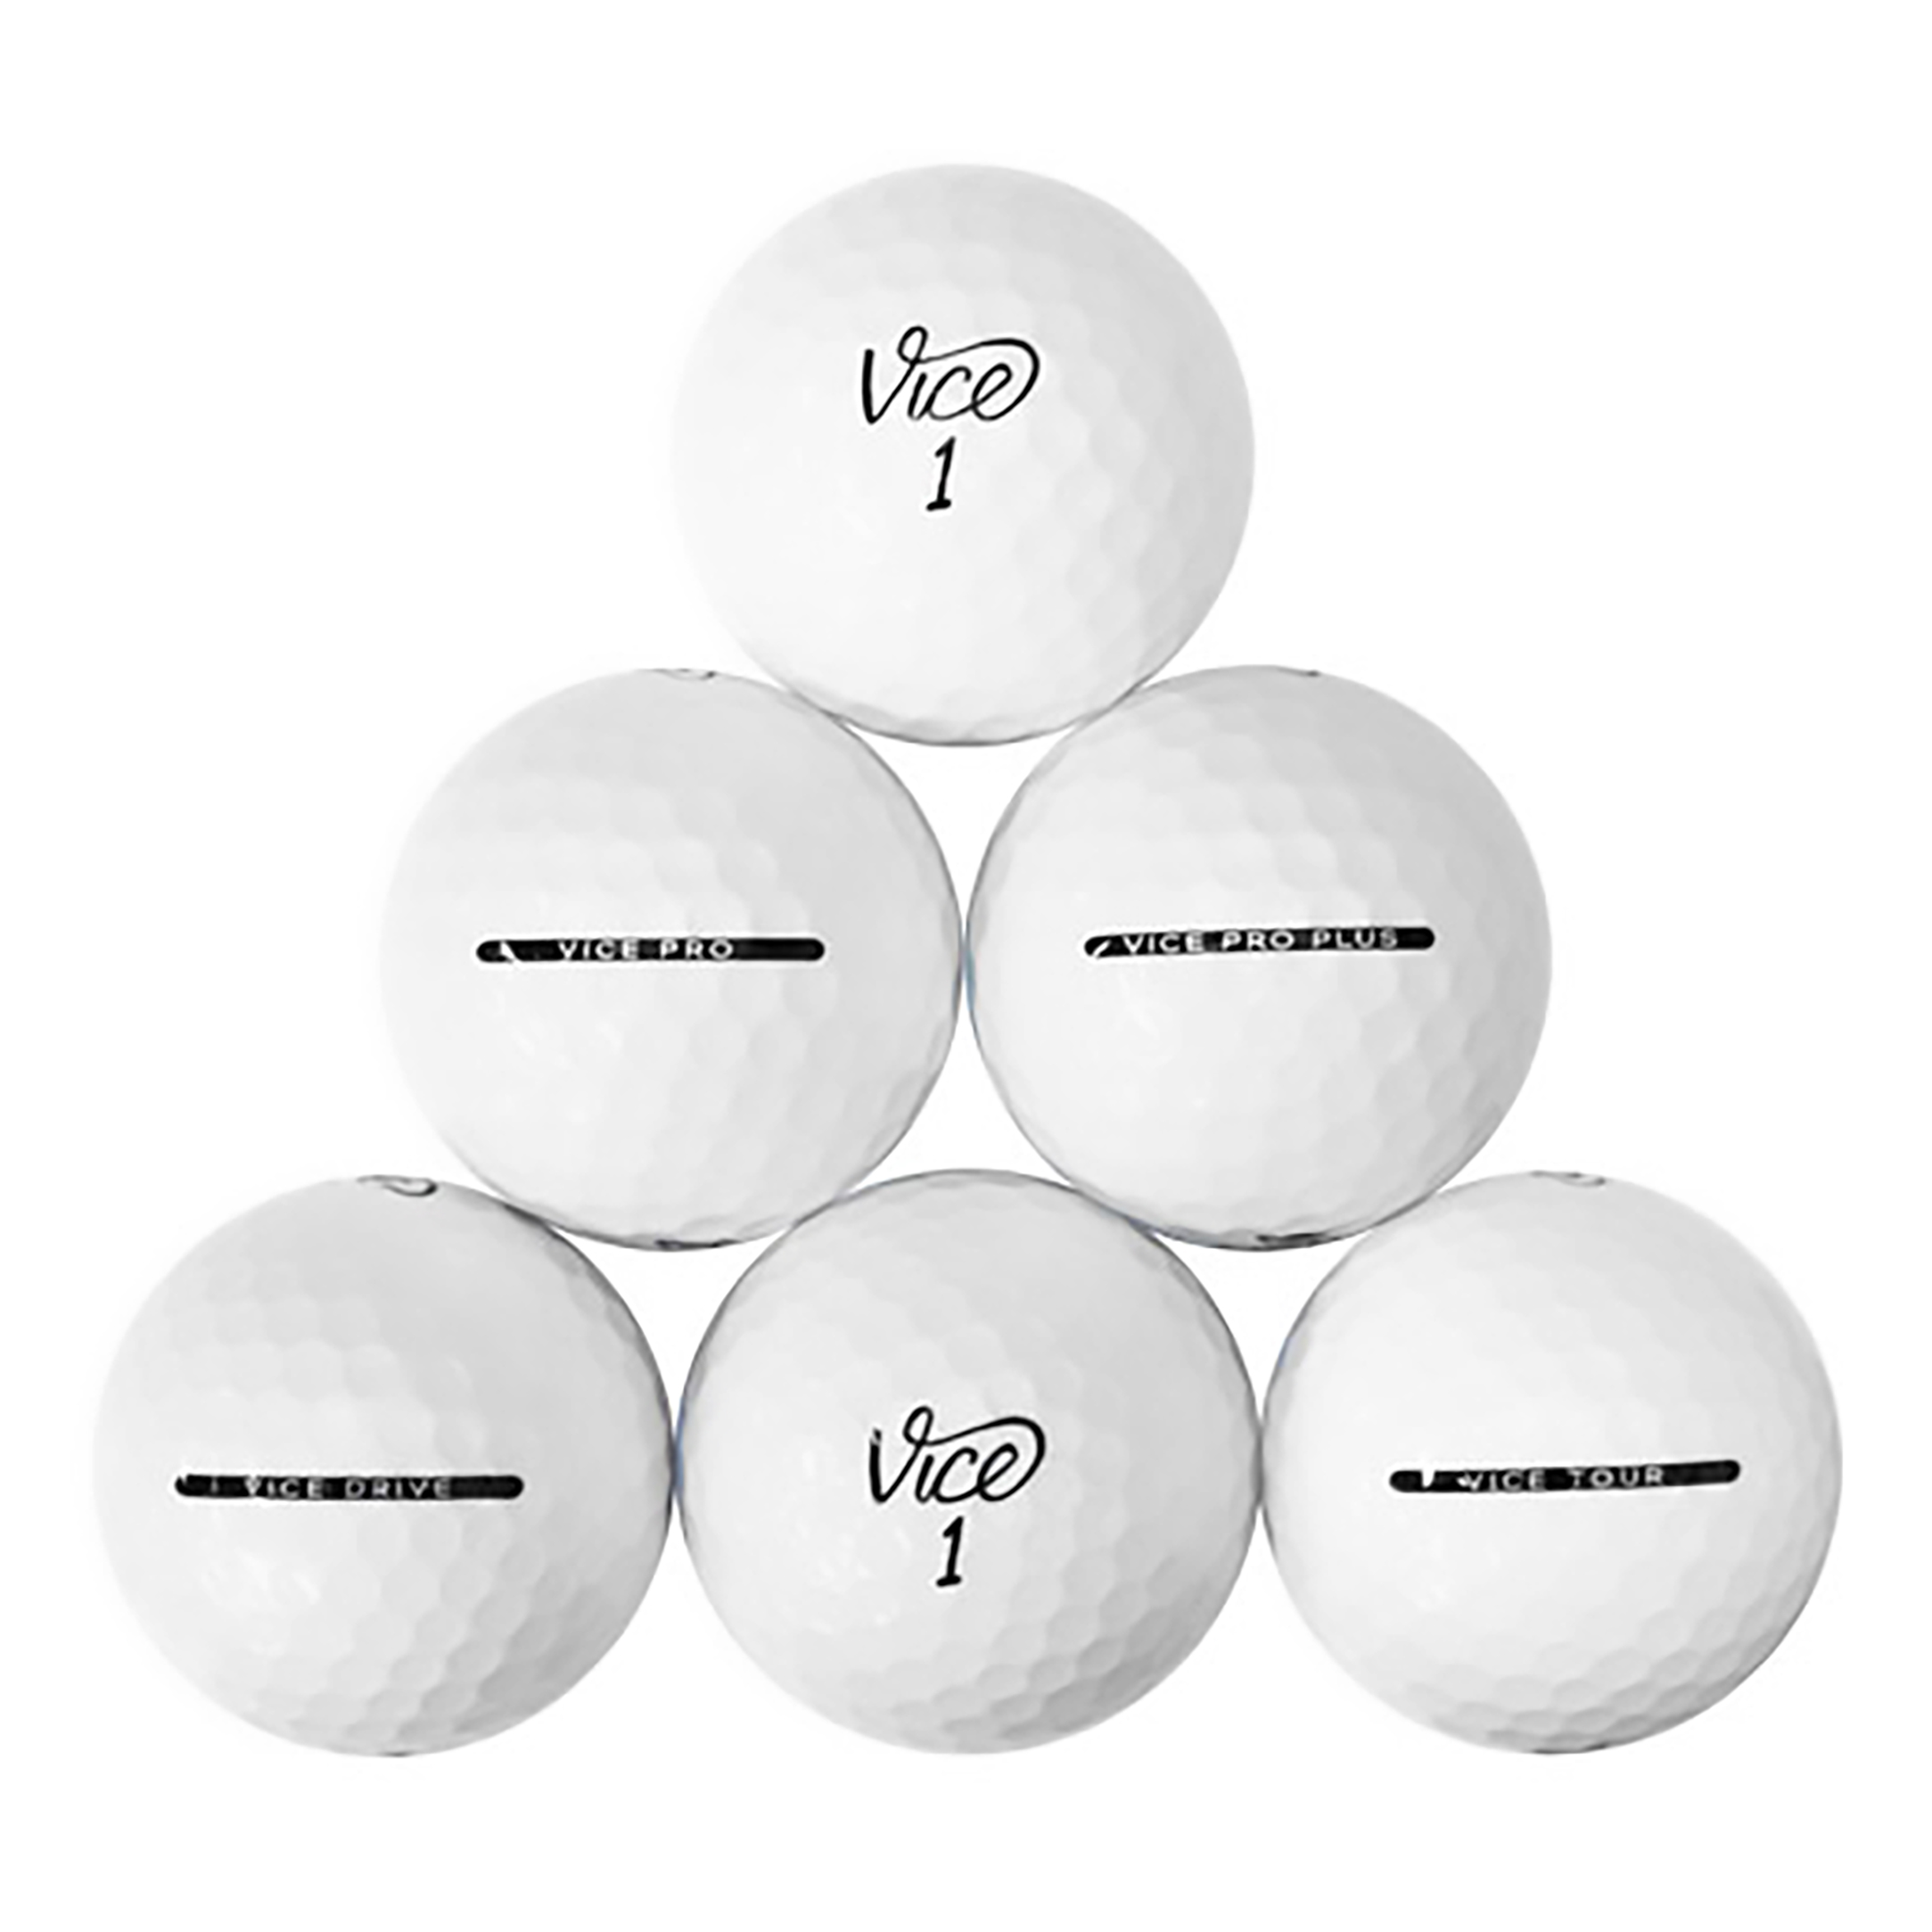 Vice Mix, Mint Golf Balls, Mint, 5a, AAAAA Quality, 50 Pack, White - image 1 of 9